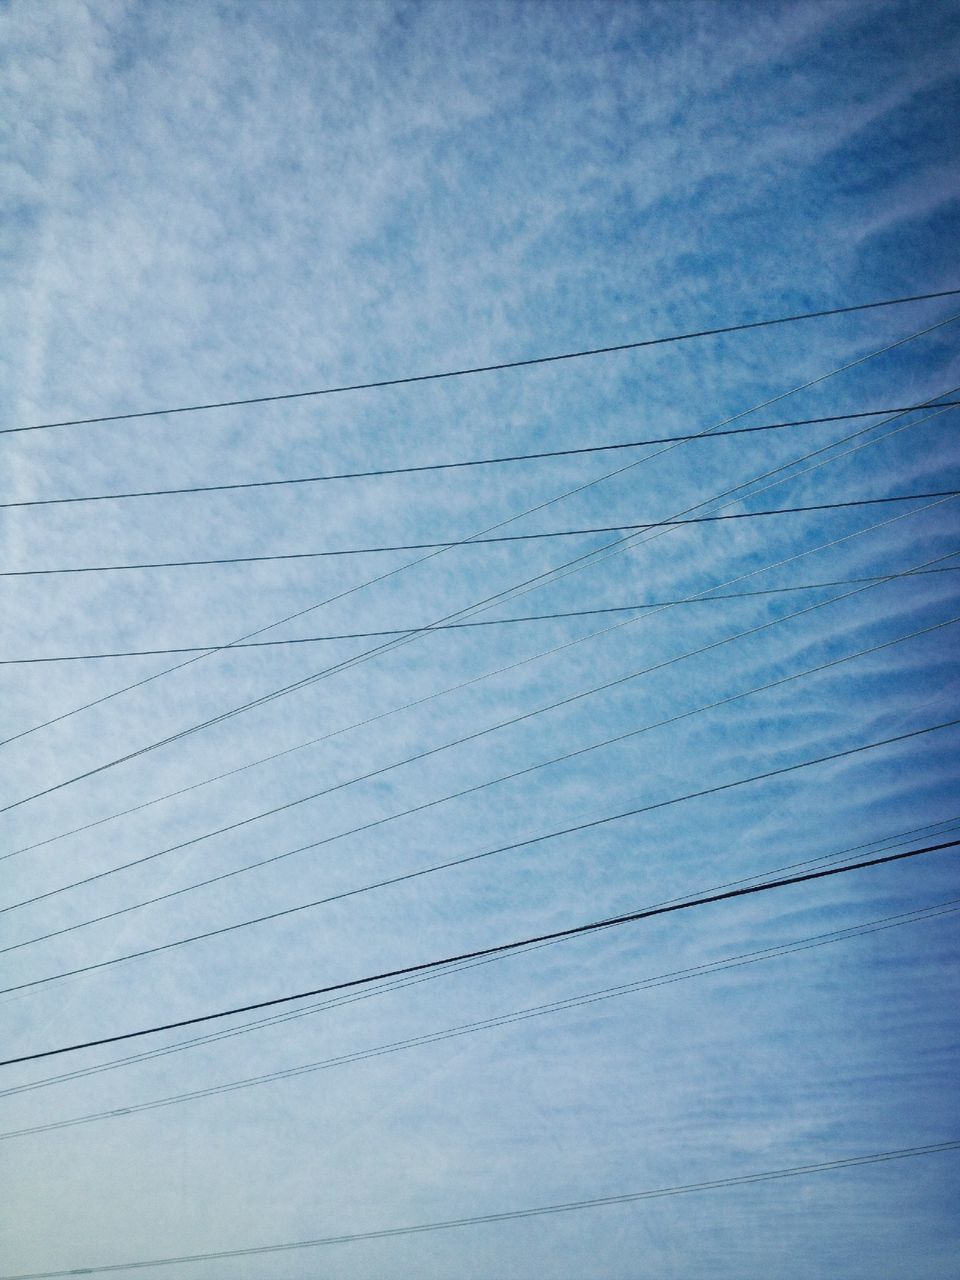 sky, connection, built structure, low angle view, cloud - sky, architecture, bridge - man made structure, cable, blue, day, outdoors, no people, pattern, cloud, power line, nature, transportation, cloudy, engineering, tranquility